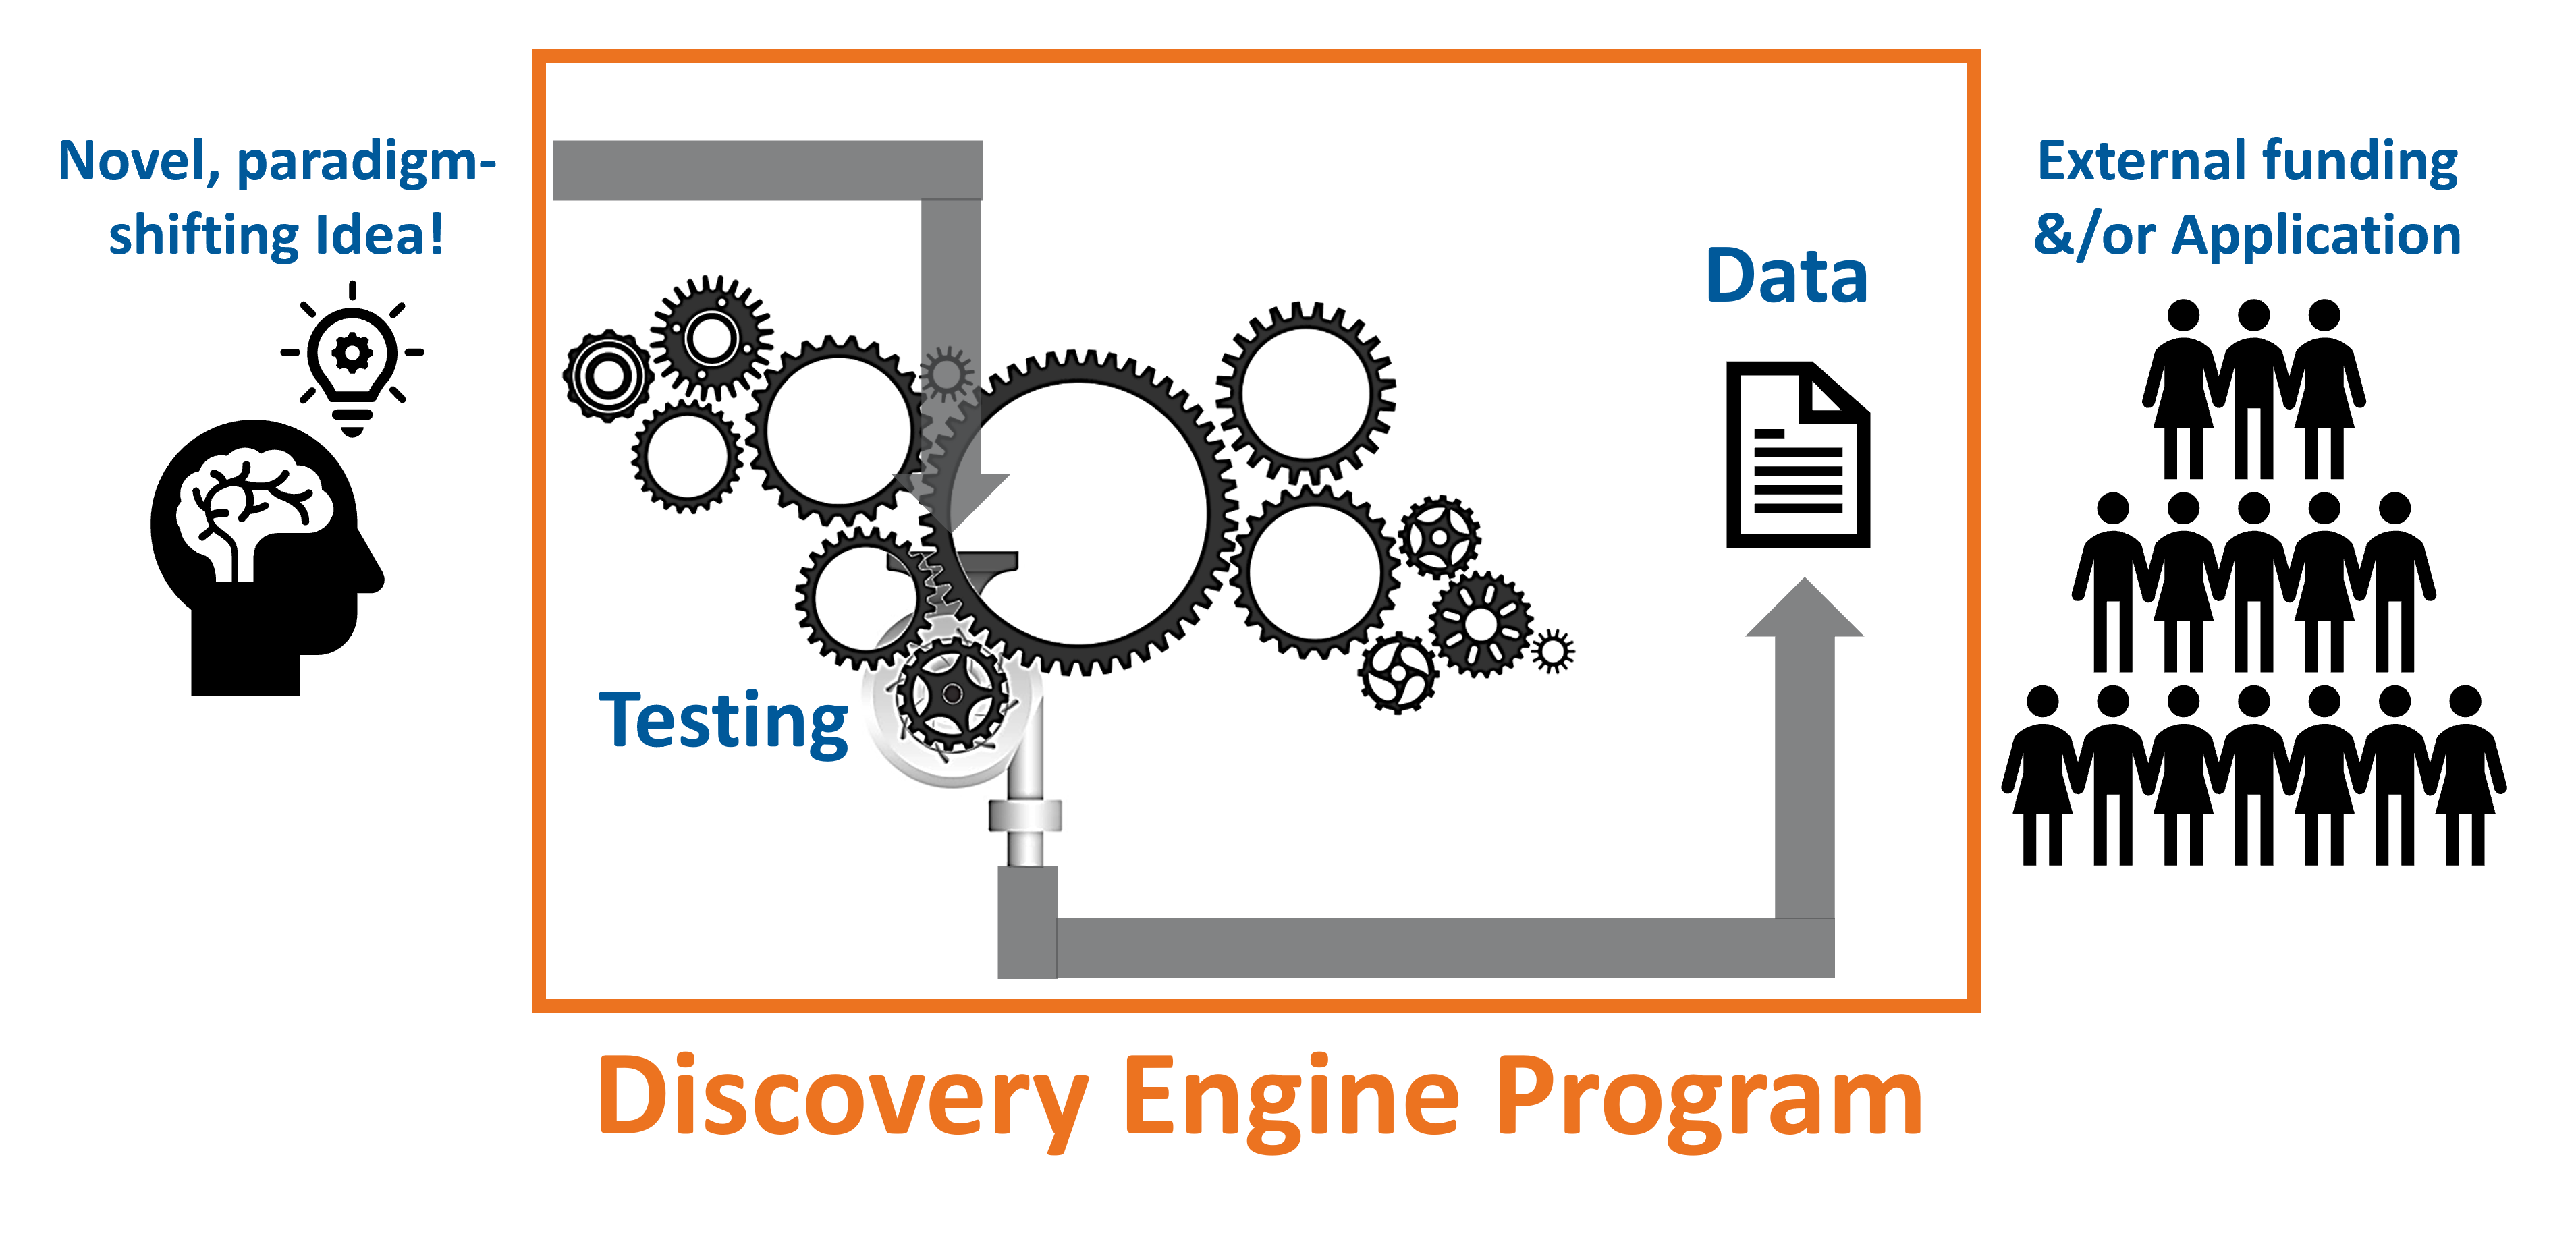 graphic depicting the discovery engine program process